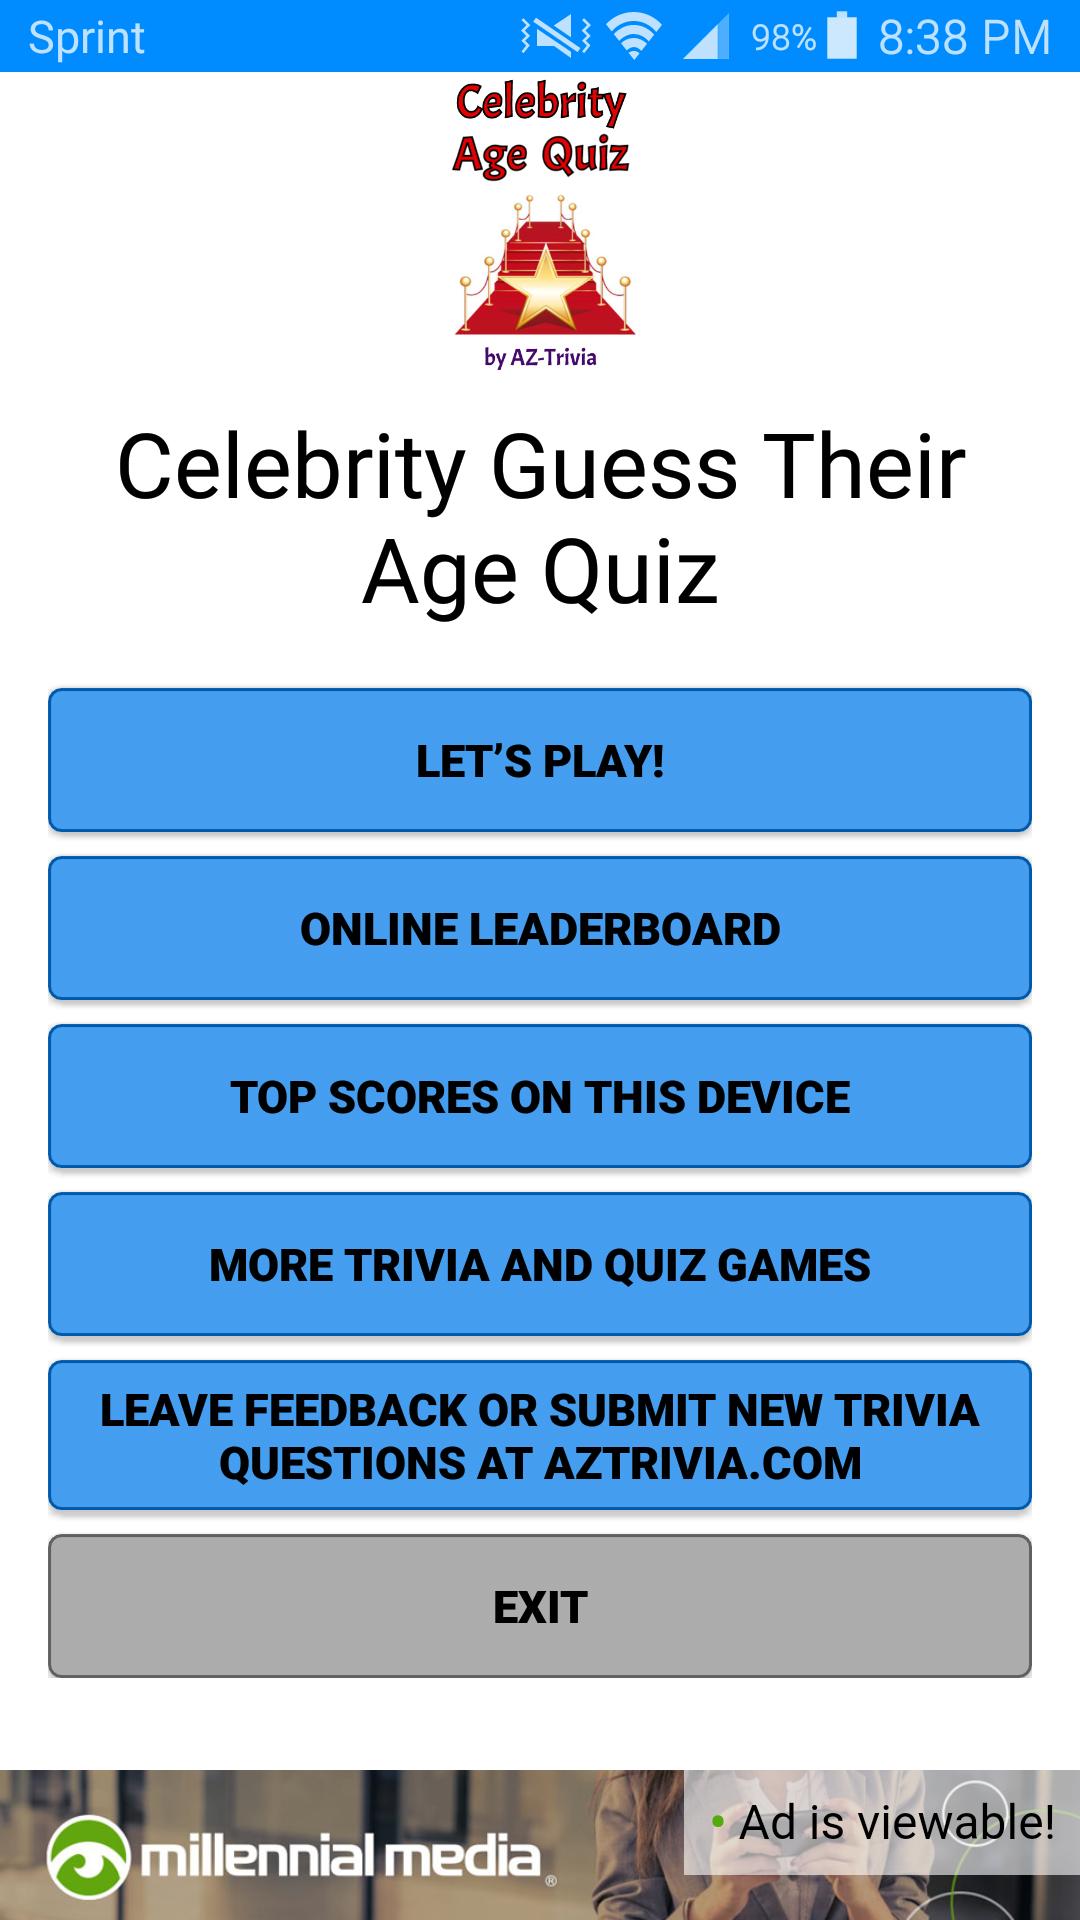 Celebrity Guess Their Age Quiz for Android - APK Download